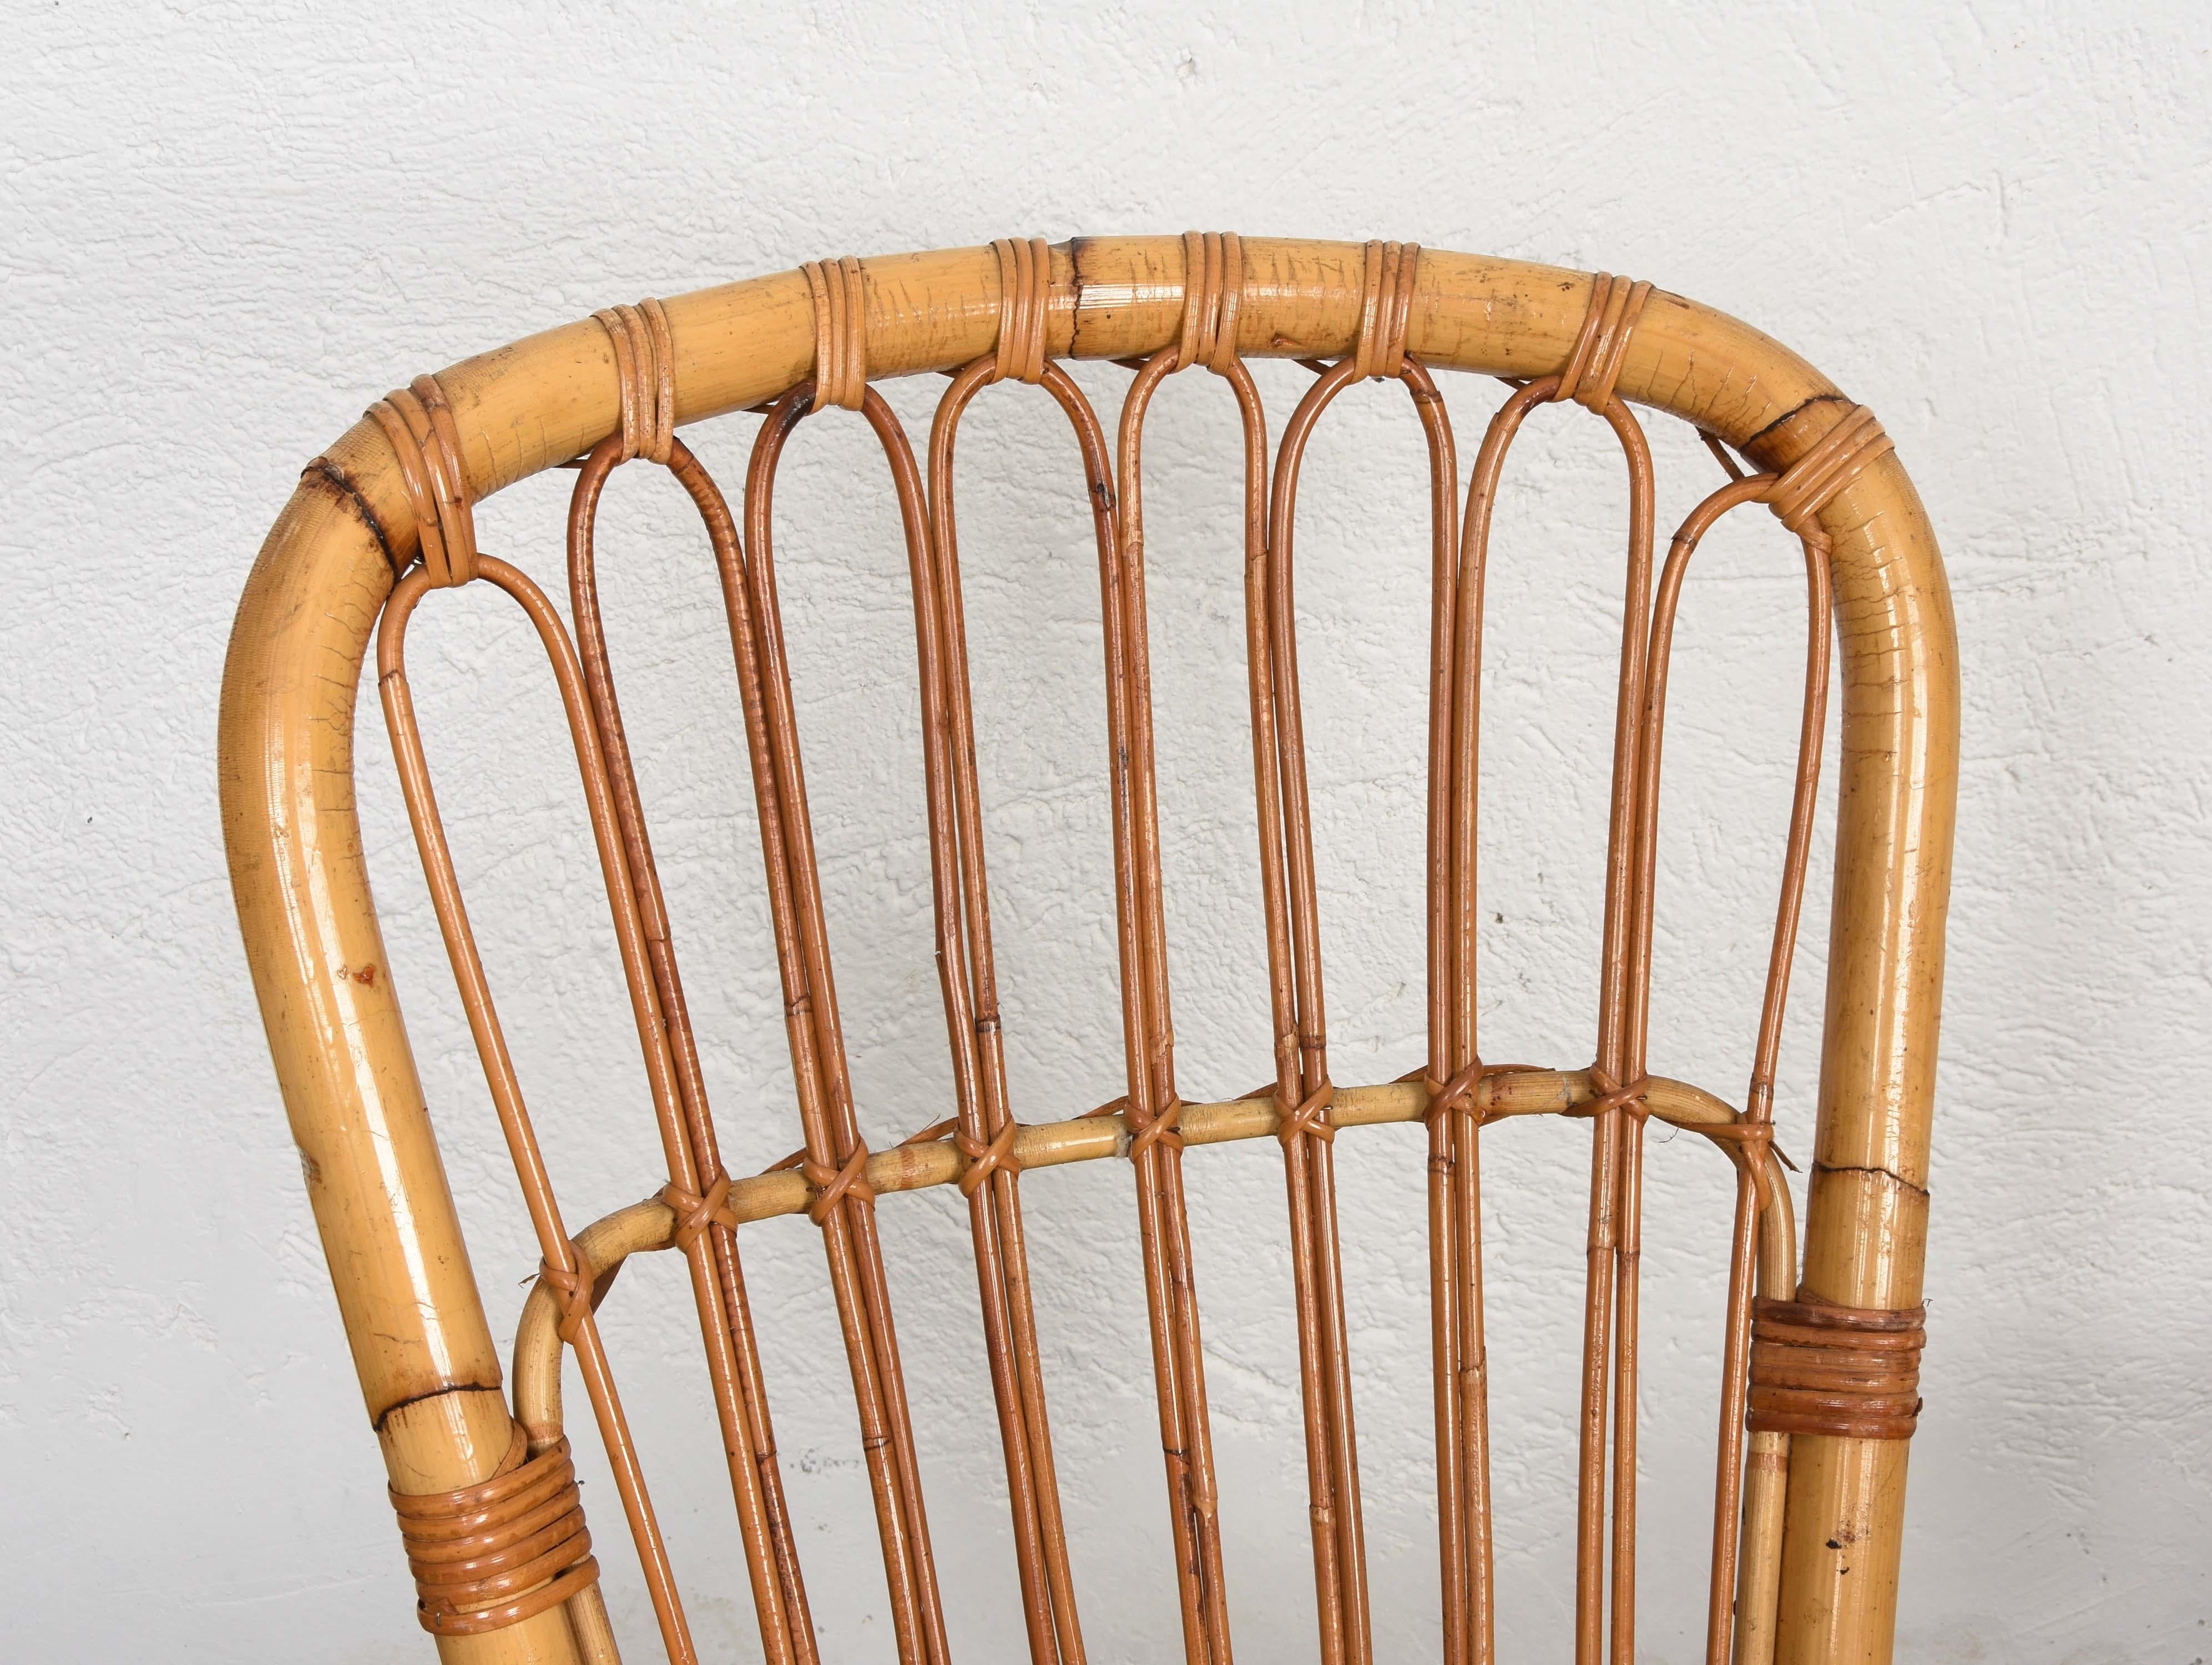 Pair of Midcentury Cote d'Azur Rattan and Bamboo Italian Rocking Chairs, 1960s For Sale 4